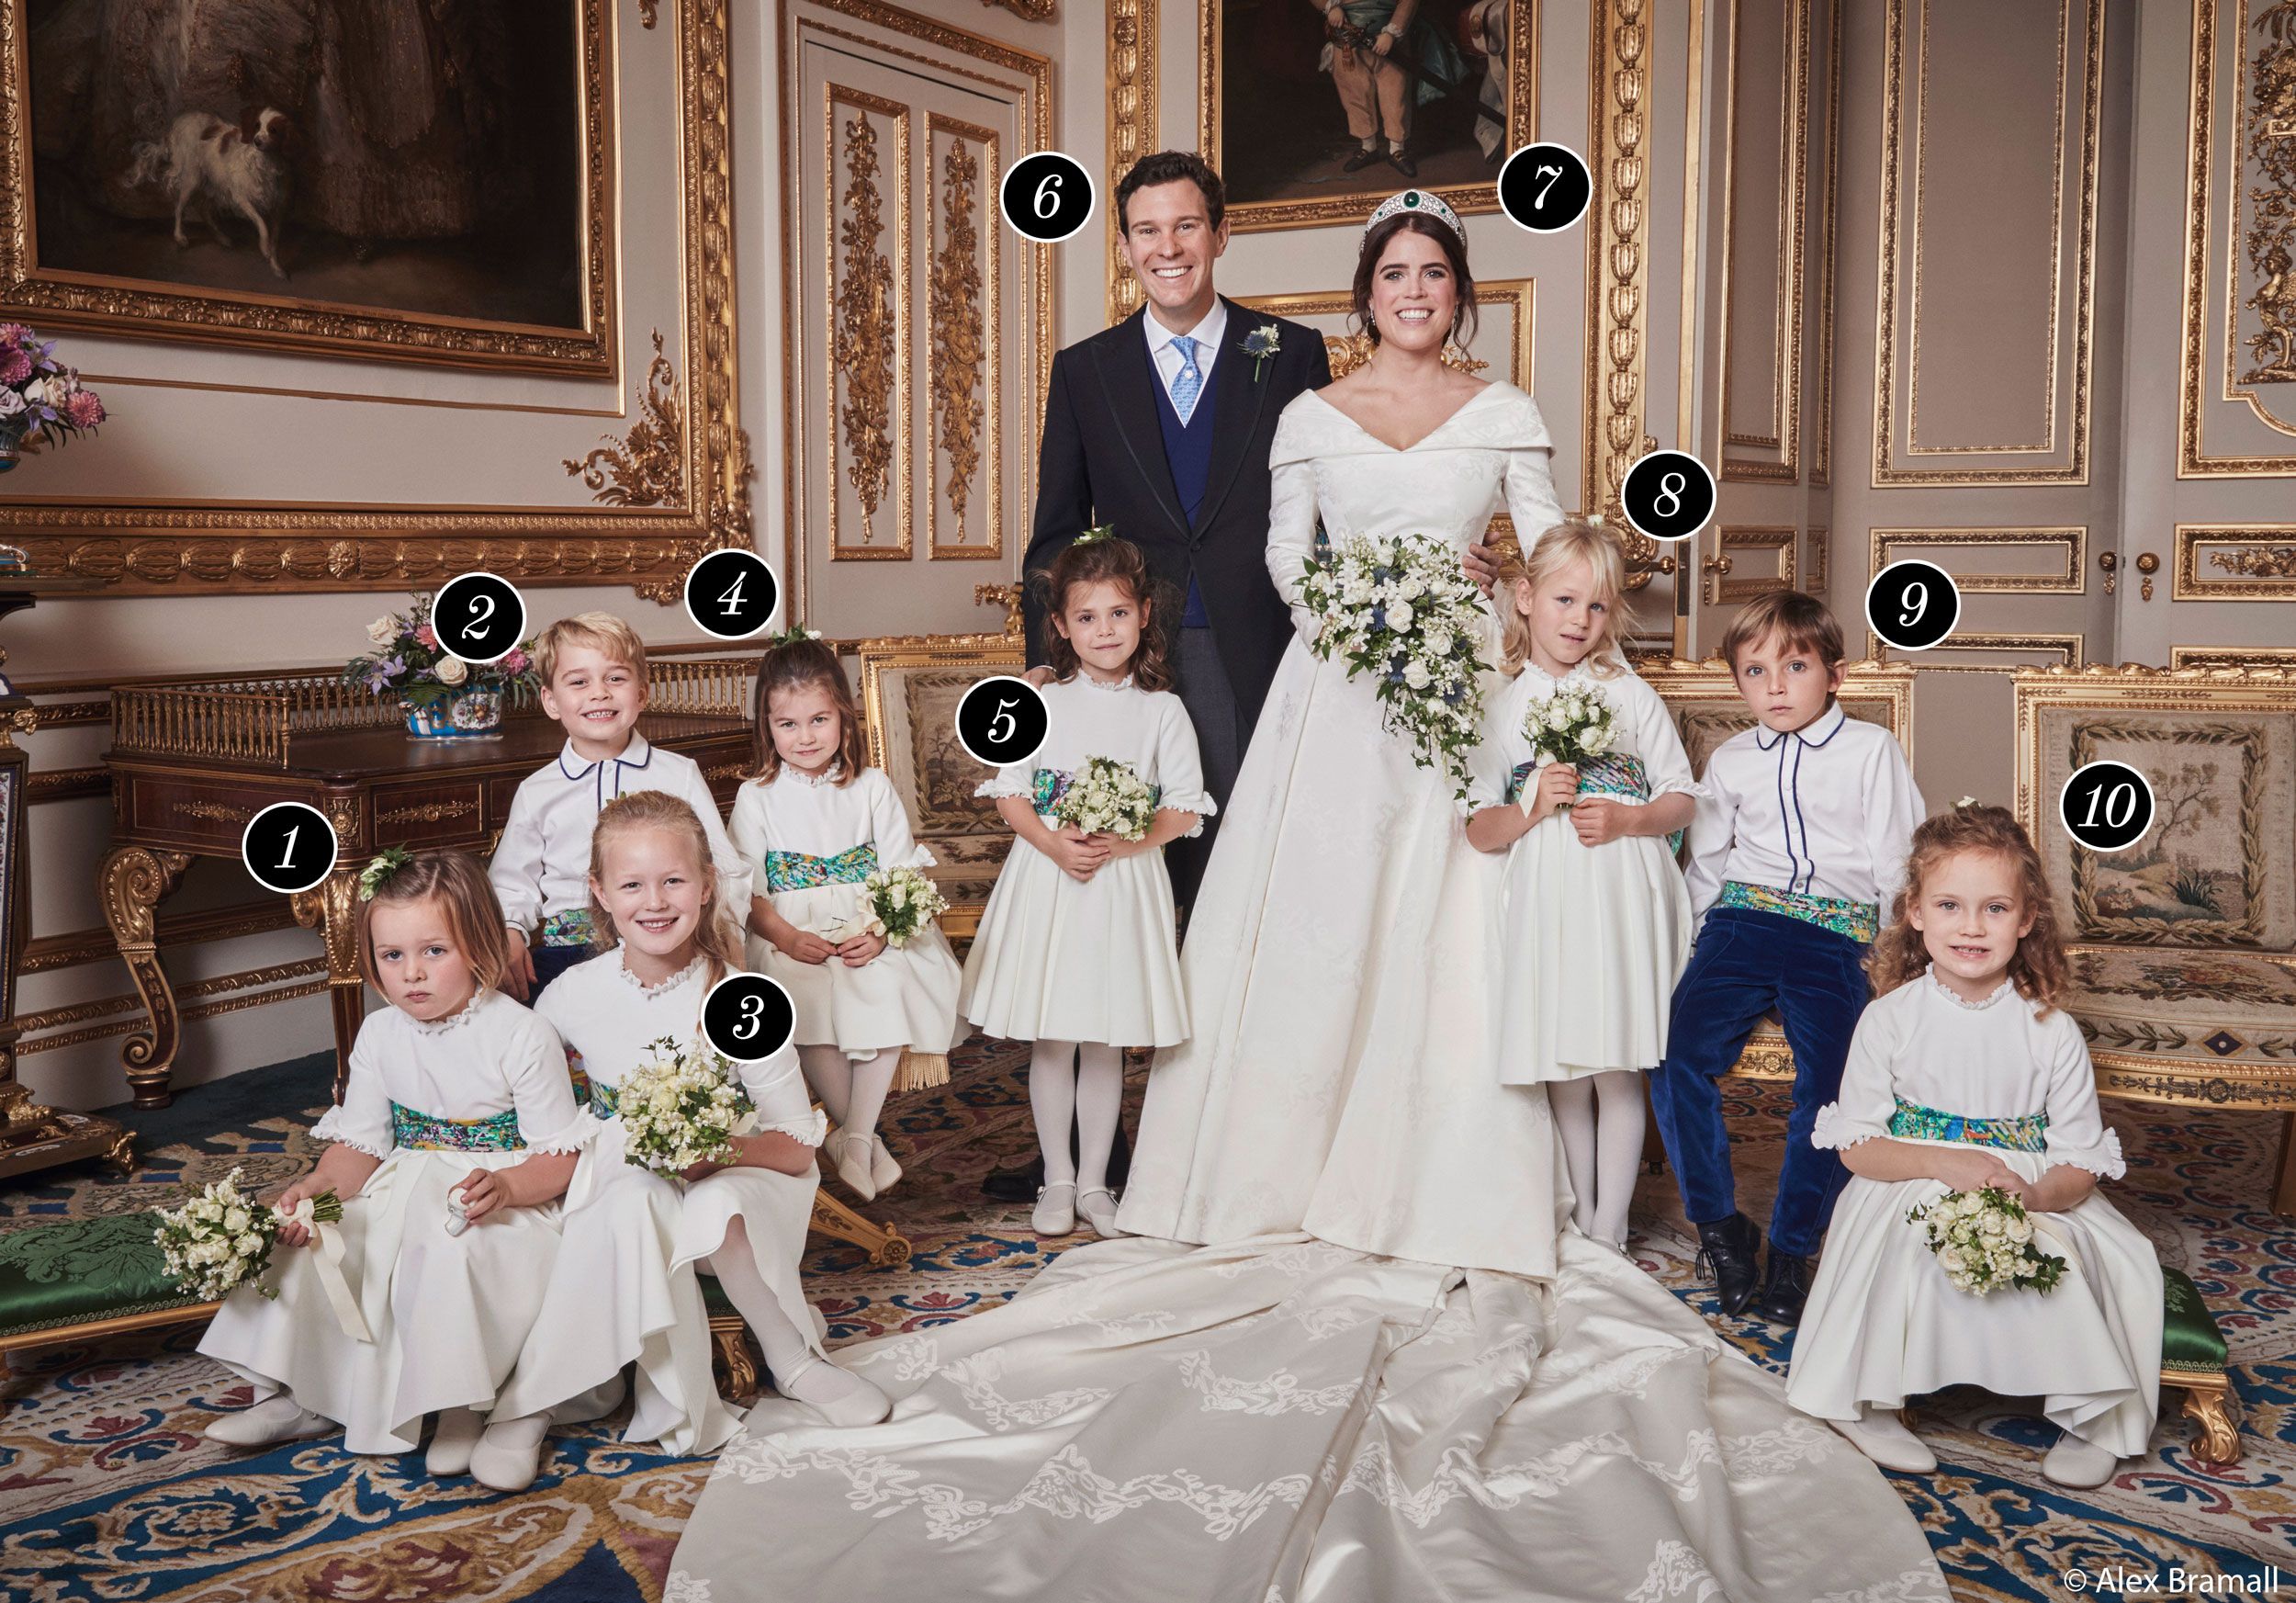 Who's in Princess Eugenie's Royal Wedding Portraits? - Princess Eugenie's  Bridesmaids and Page Boys Portraits